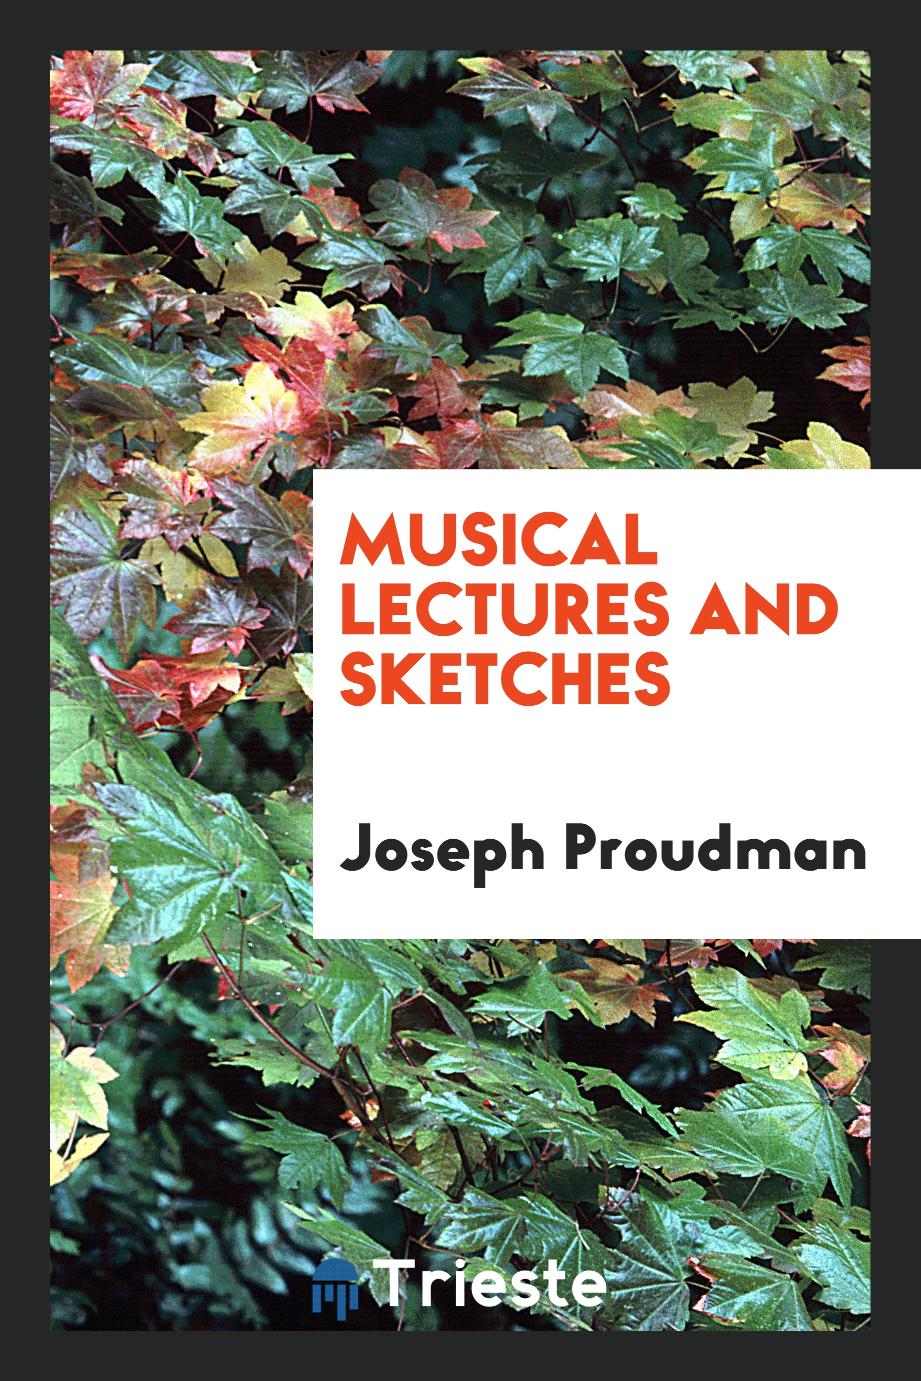 Musical Lectures and Sketches